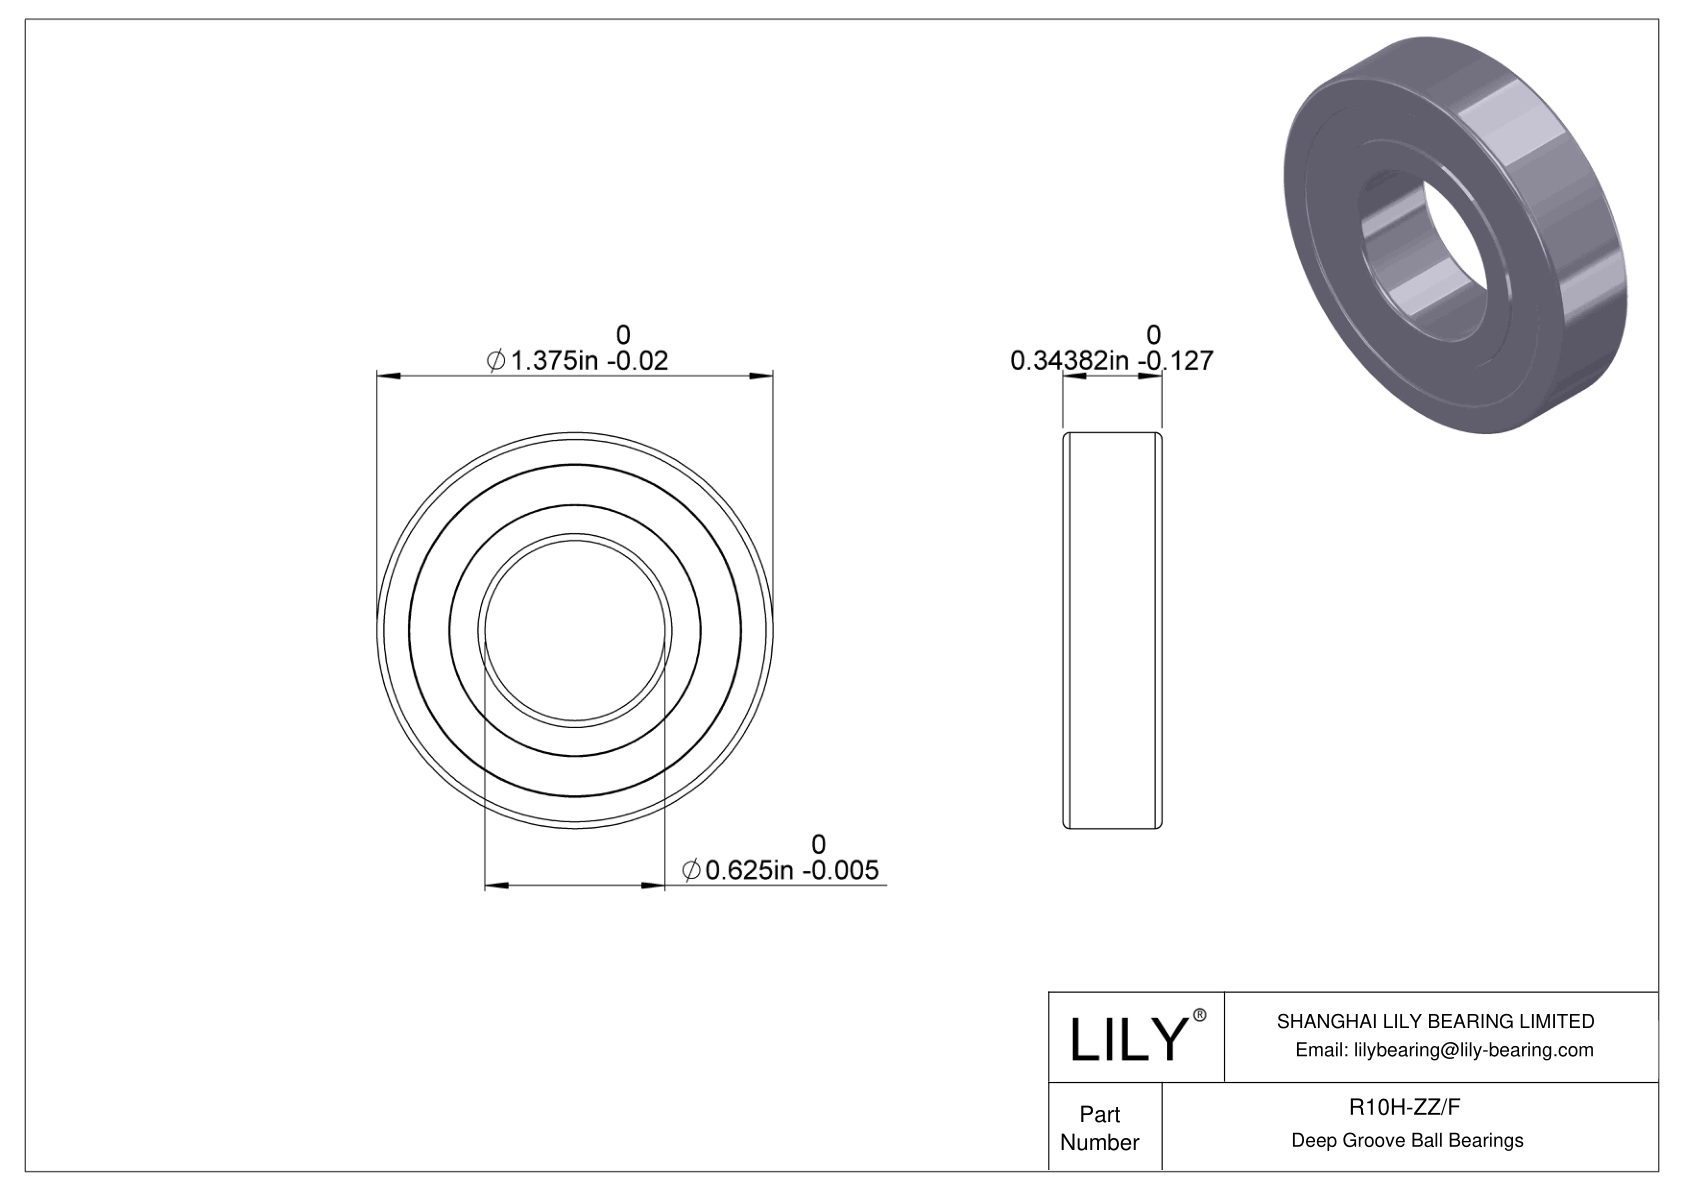 R10H-ZZ/F Corrosion Resistant Deep Groove Ball Bearings cad drawing